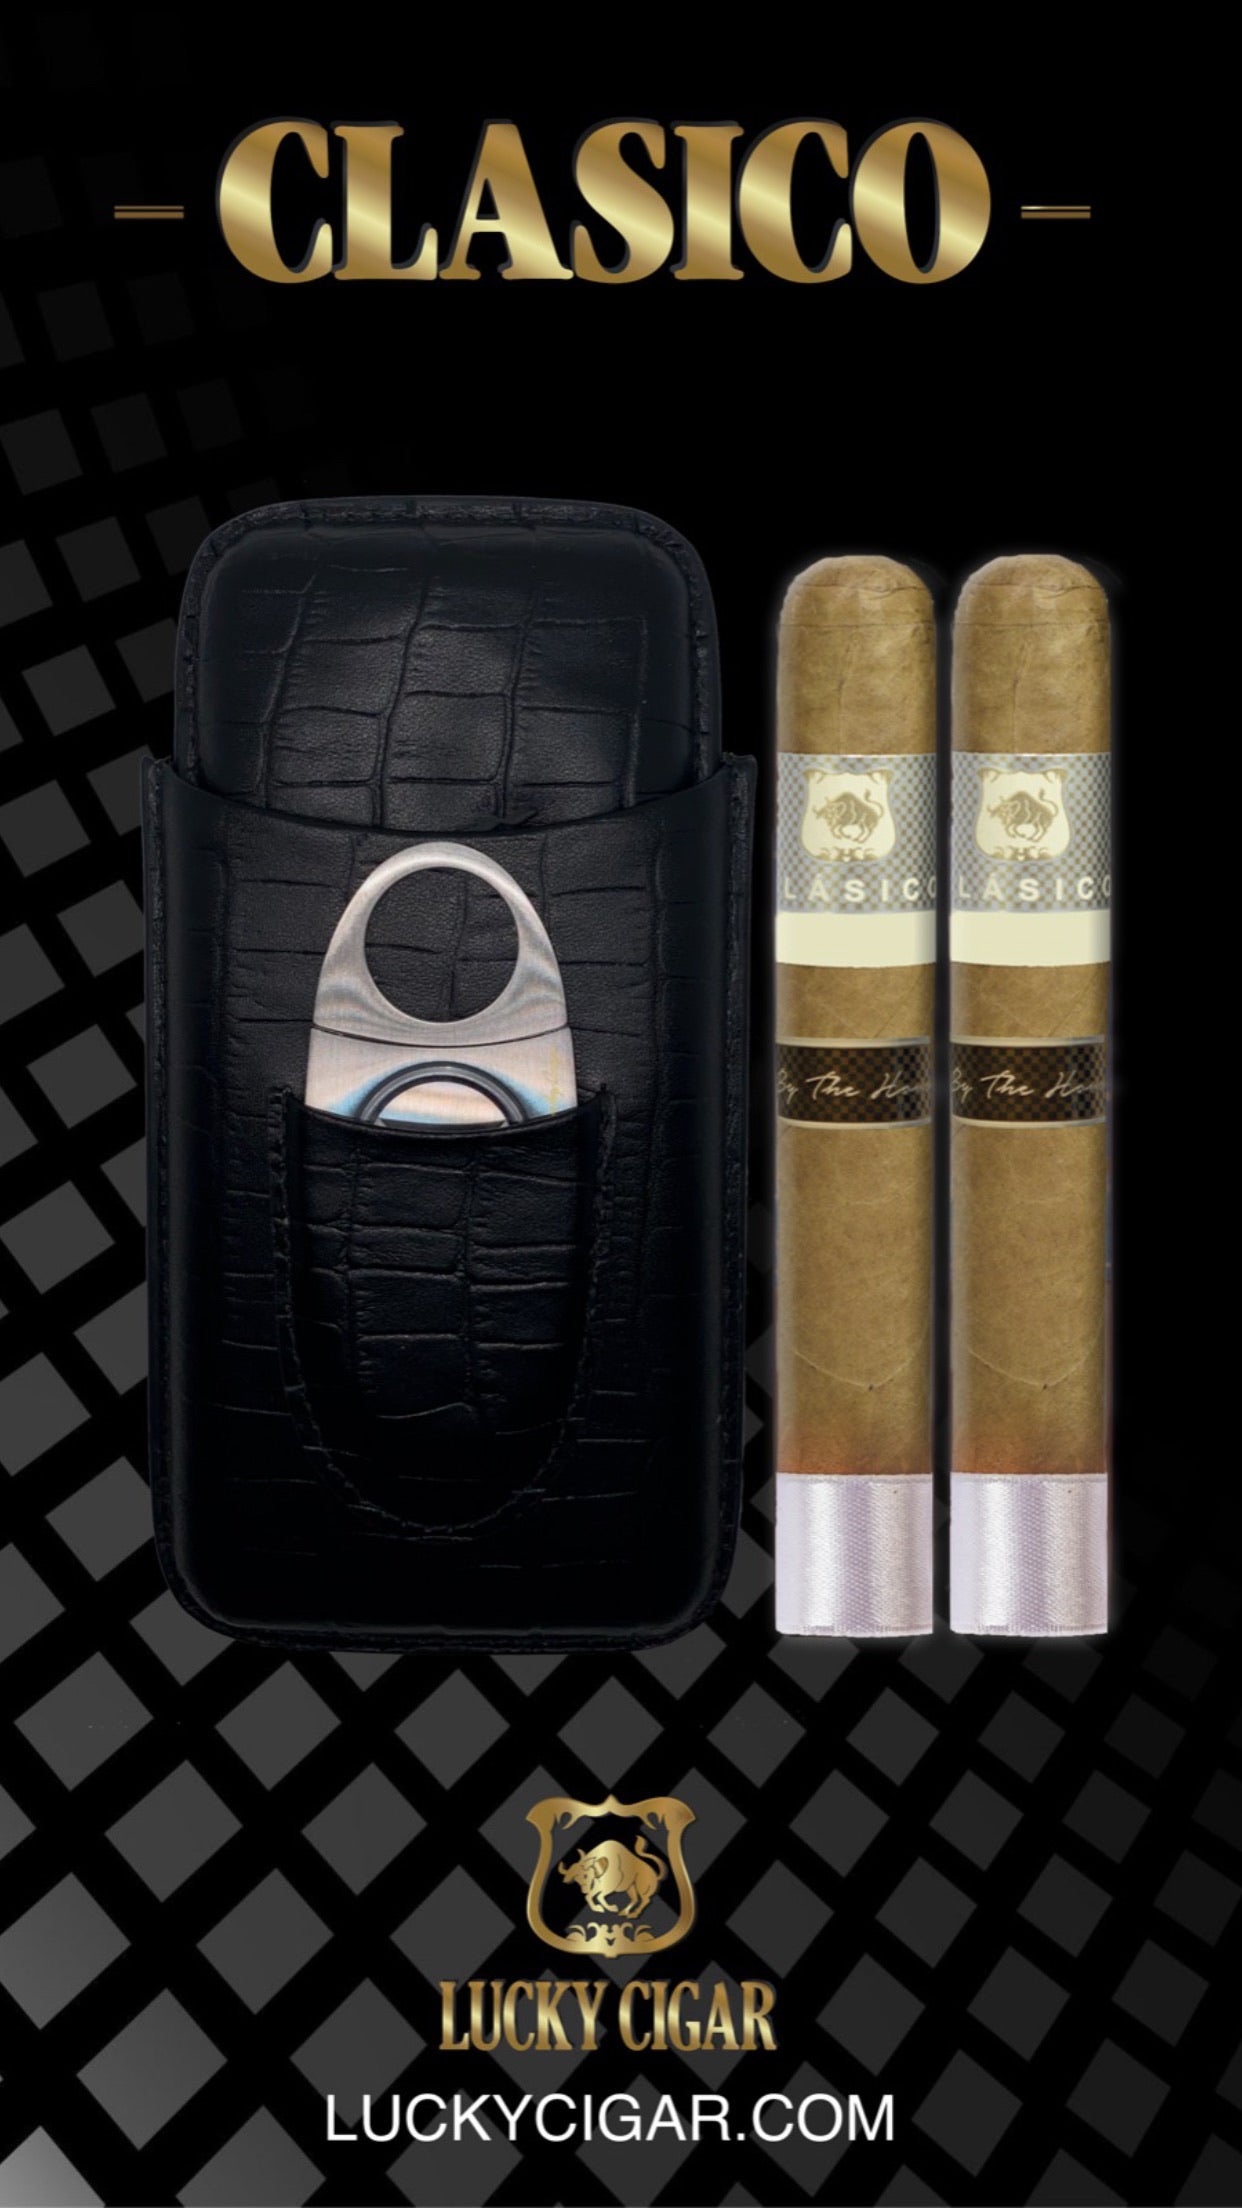 Lucky Cigar Sampler Sets: Set of 2 Cigars, Classico with Cigar Case, Cutter